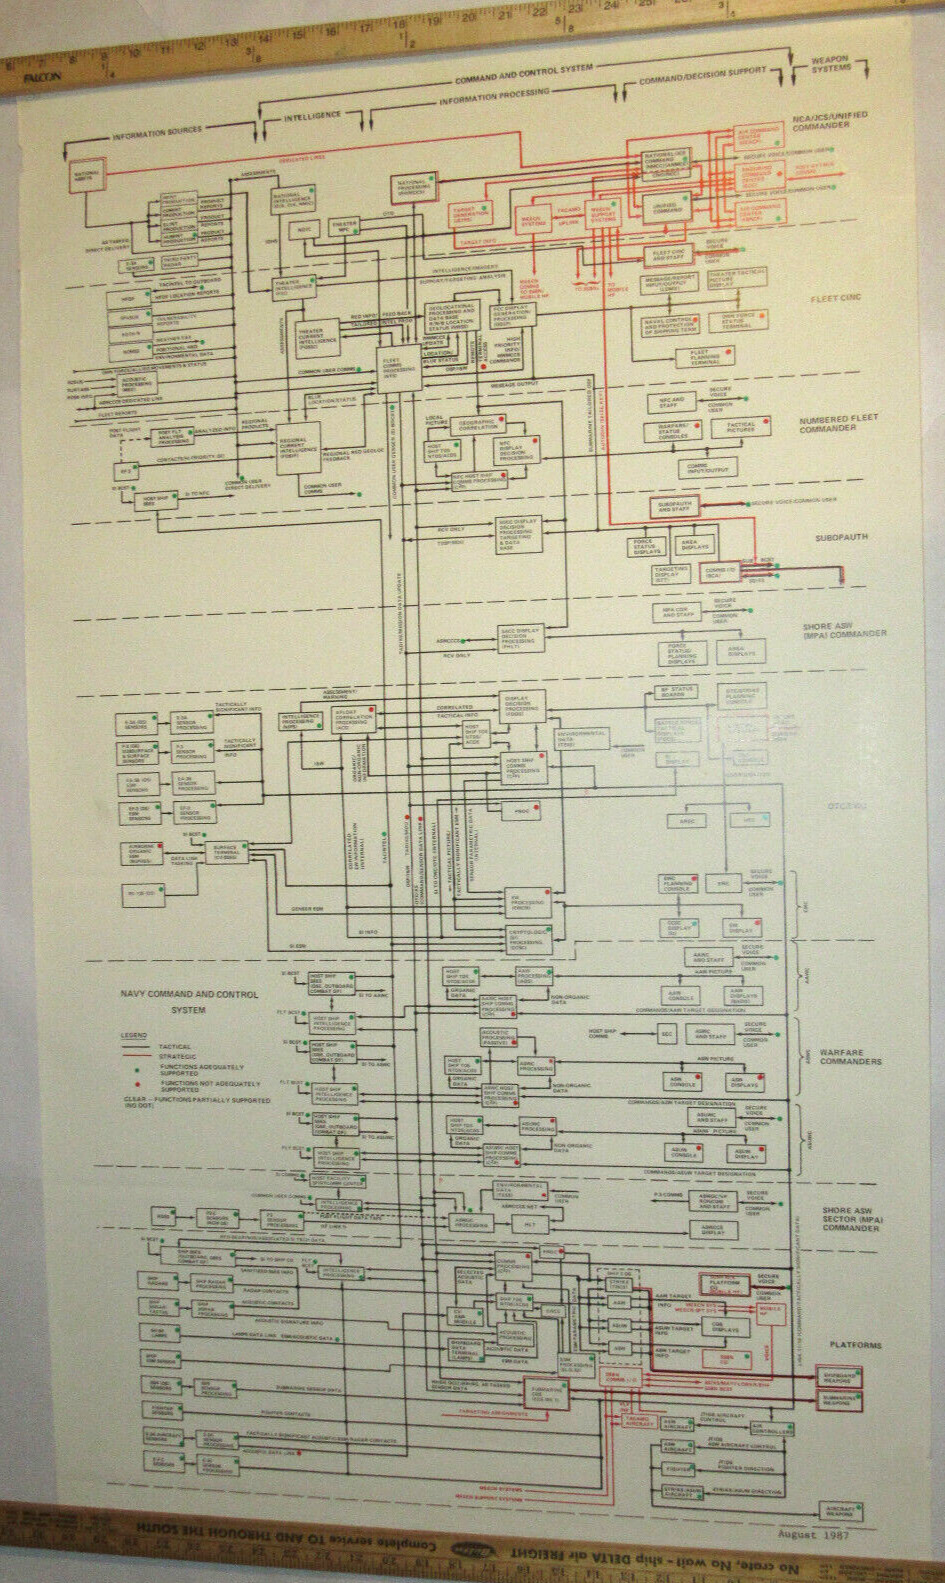 VTG 1987 GENUINE U. S. NAVY COMMAND AND CONTROL SYSTEM WALL CHART/POSTER C³I